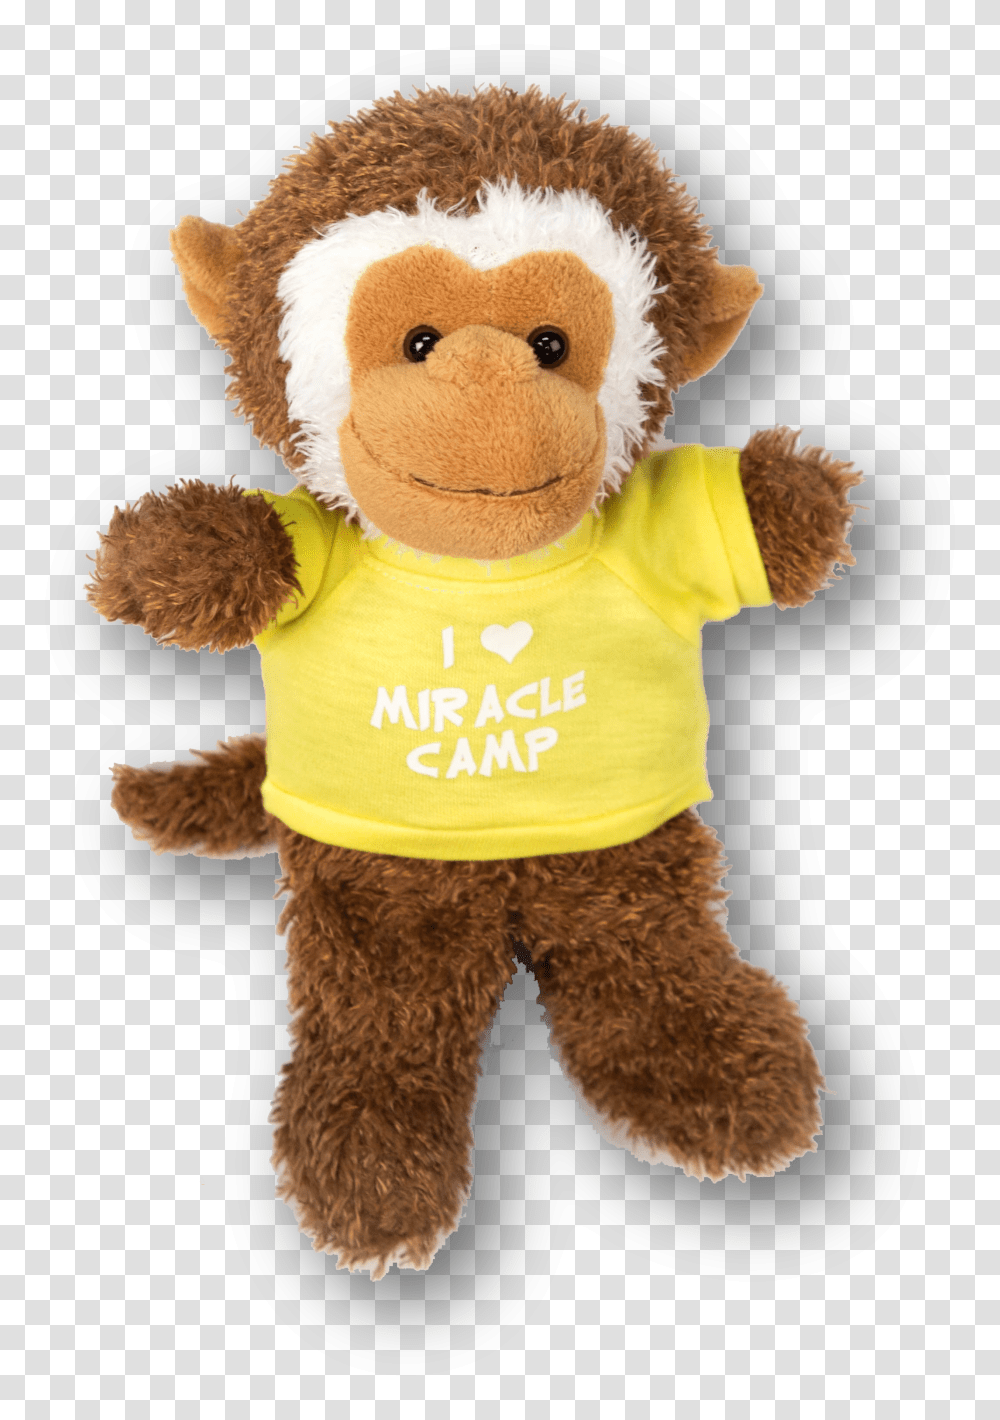 Baby Monkey Stuffed Toy Transparent Png